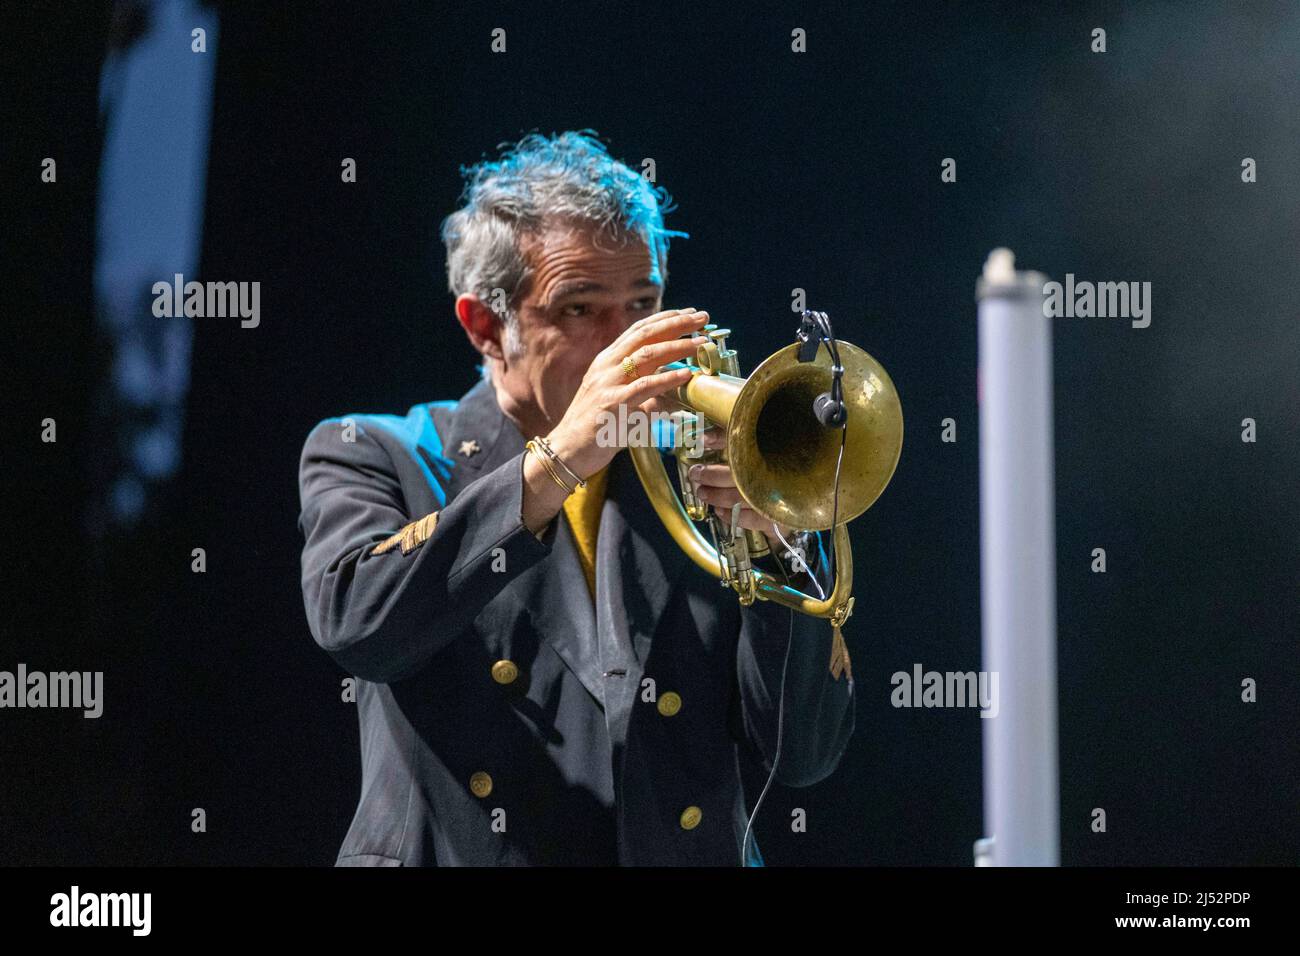 Verona, Italy. 30 June 2021. Picture shows Paolo Fresu during the performance at Teatro Romano in Verona for Rumors Festival 2021 Stock Photo